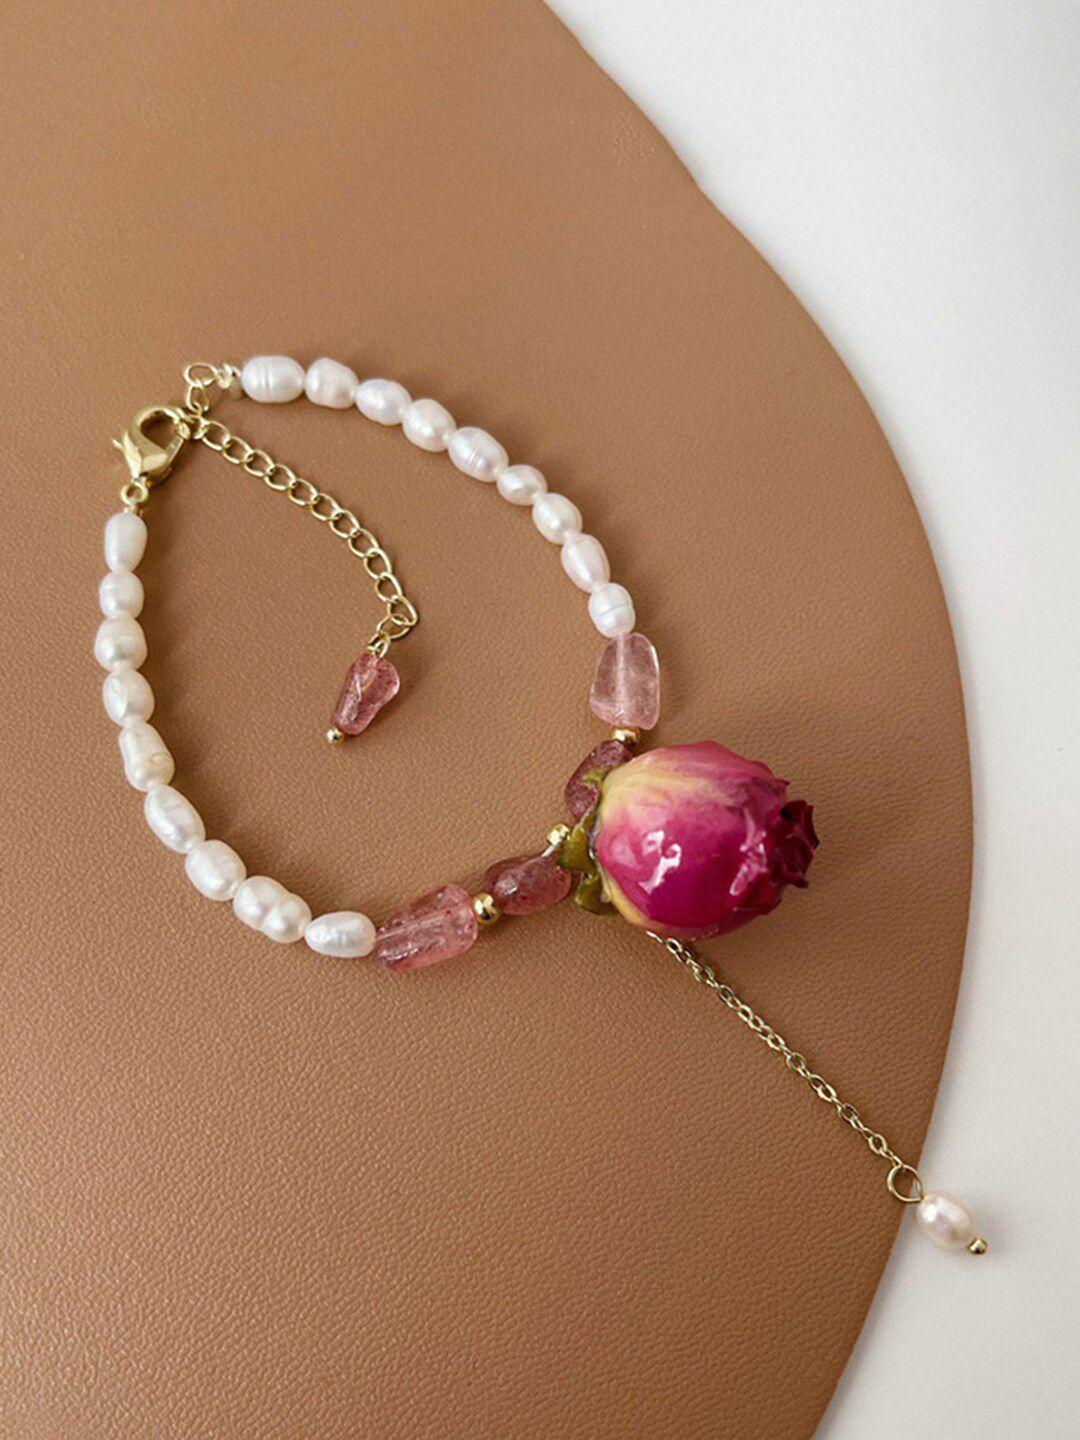 yellow chimes women gold tone pearl beaded  pink rose charm hanging adjustable bracelet